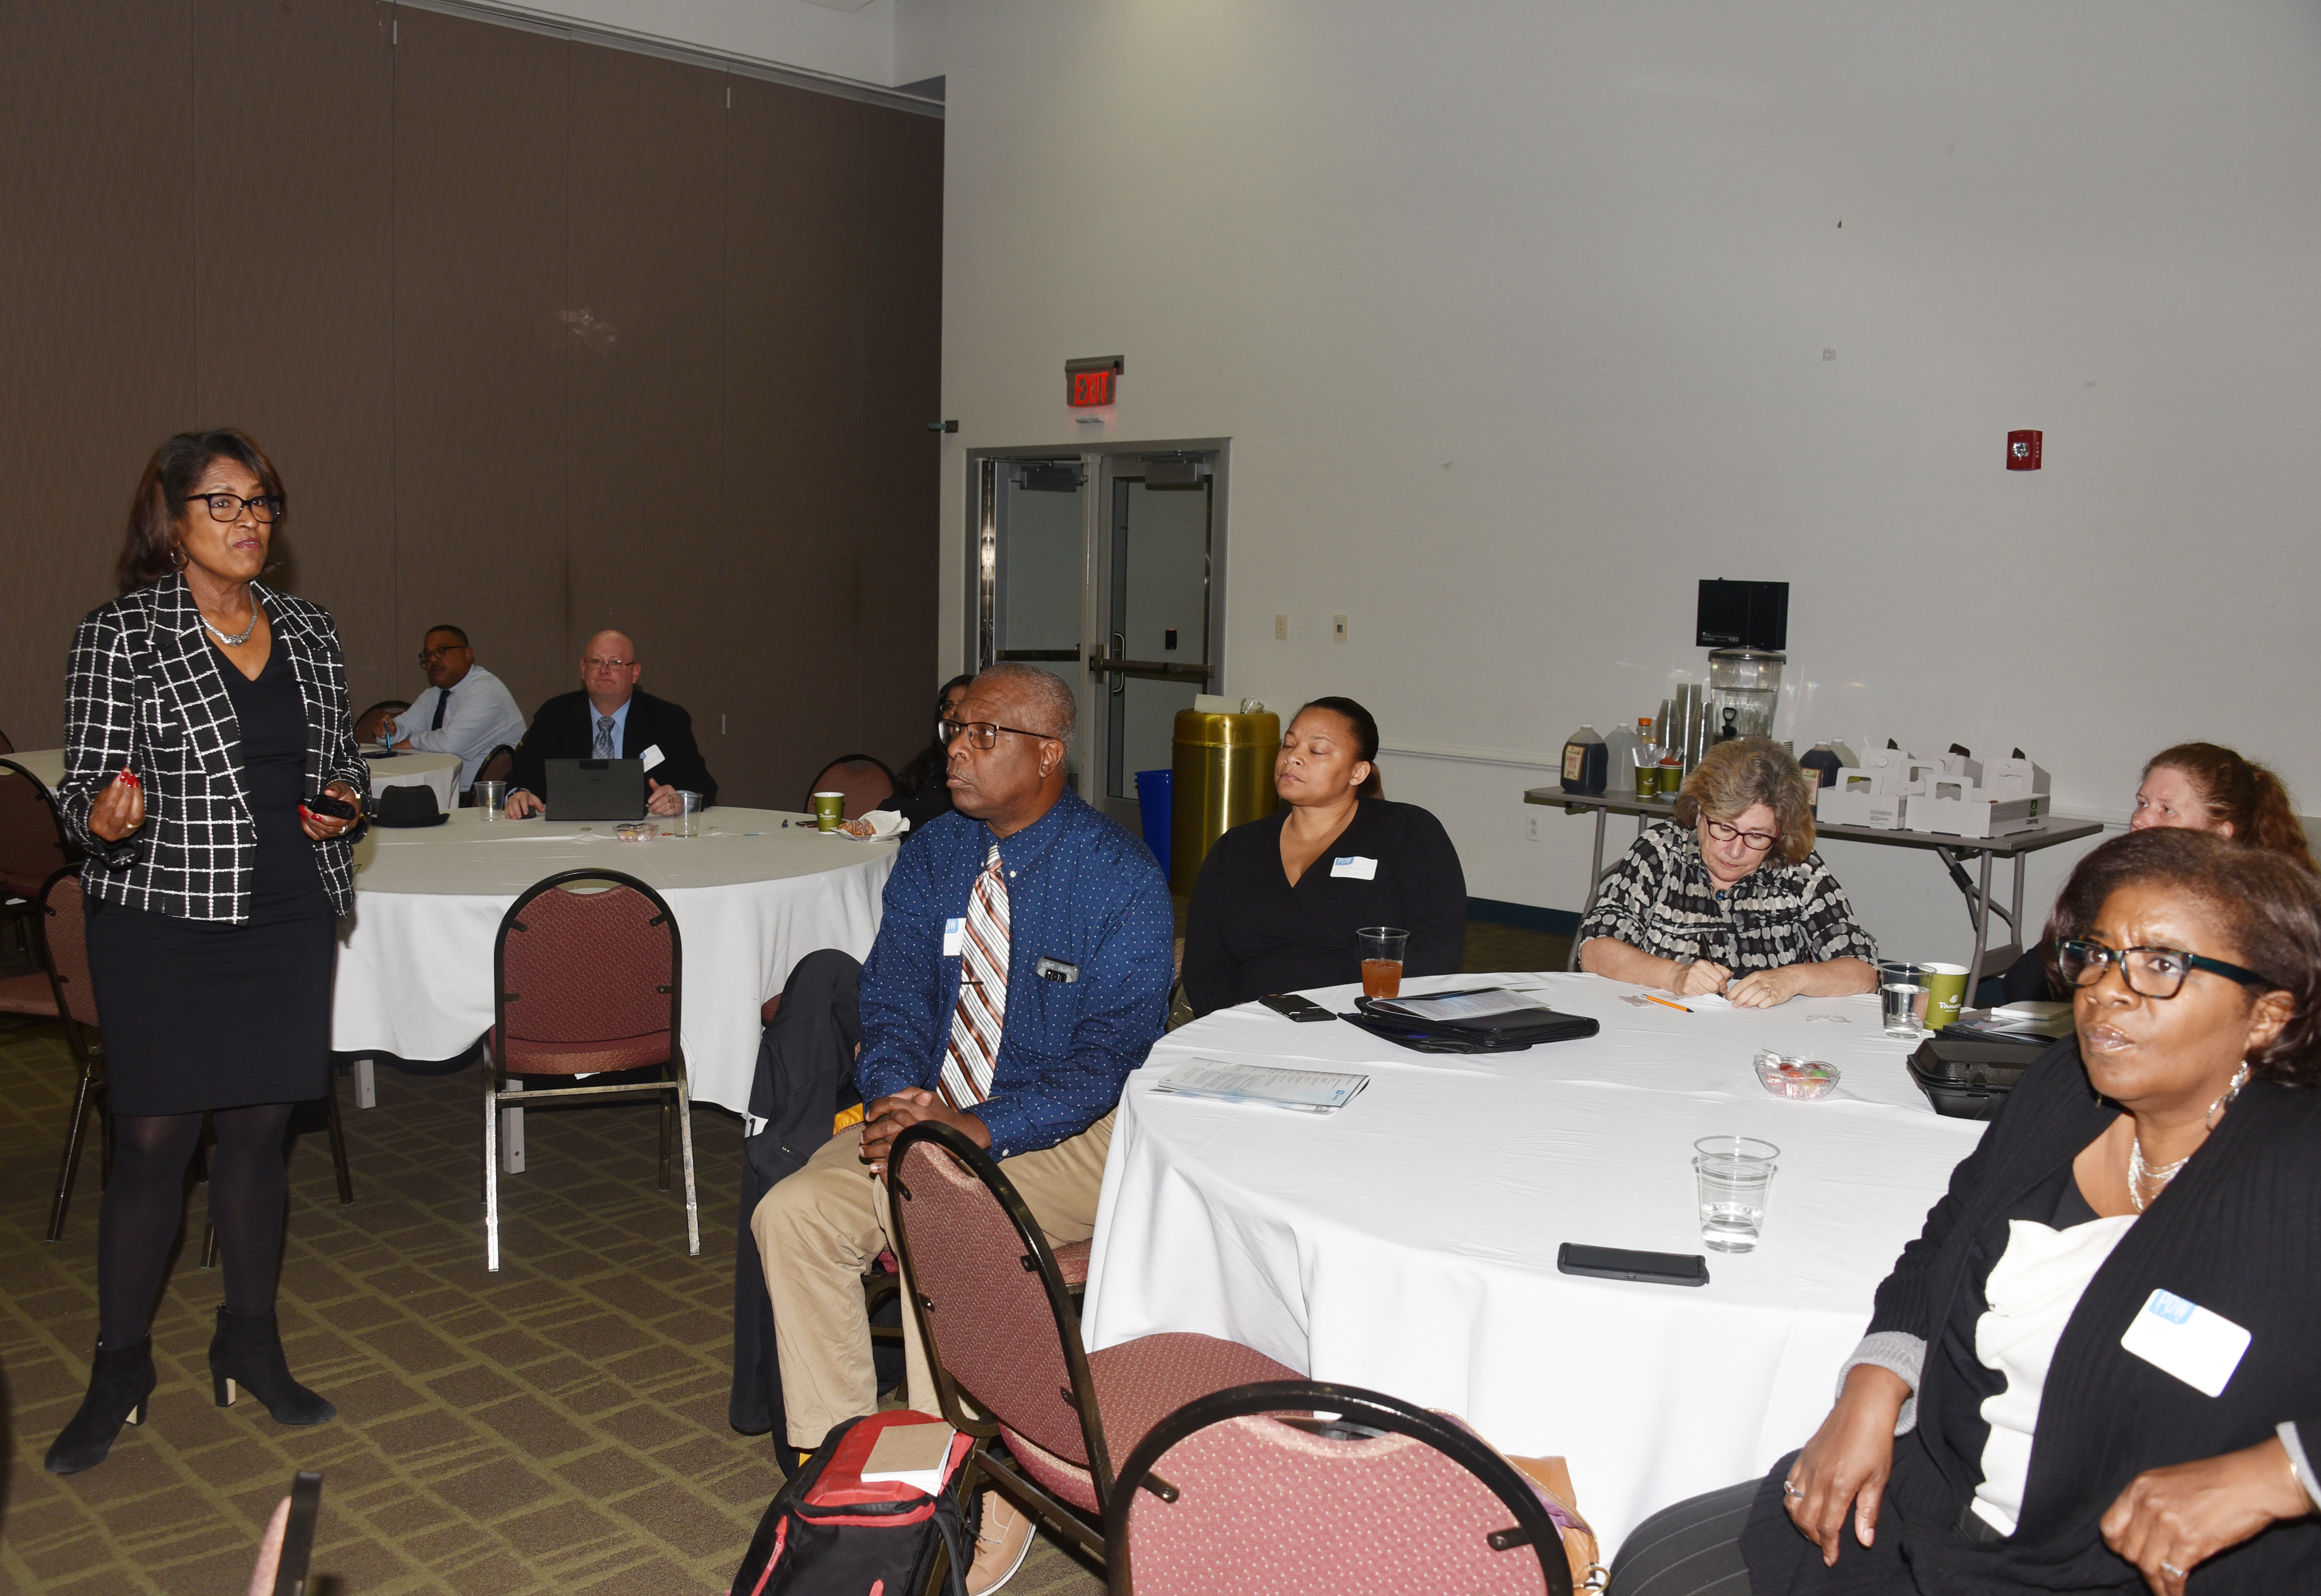 Terri Easter (l), founder of T.H. Easter Consulting, conducts a workshop to management personnel on "Maximizing Performance" during the afternoon sessions of the Professional Development Workshop